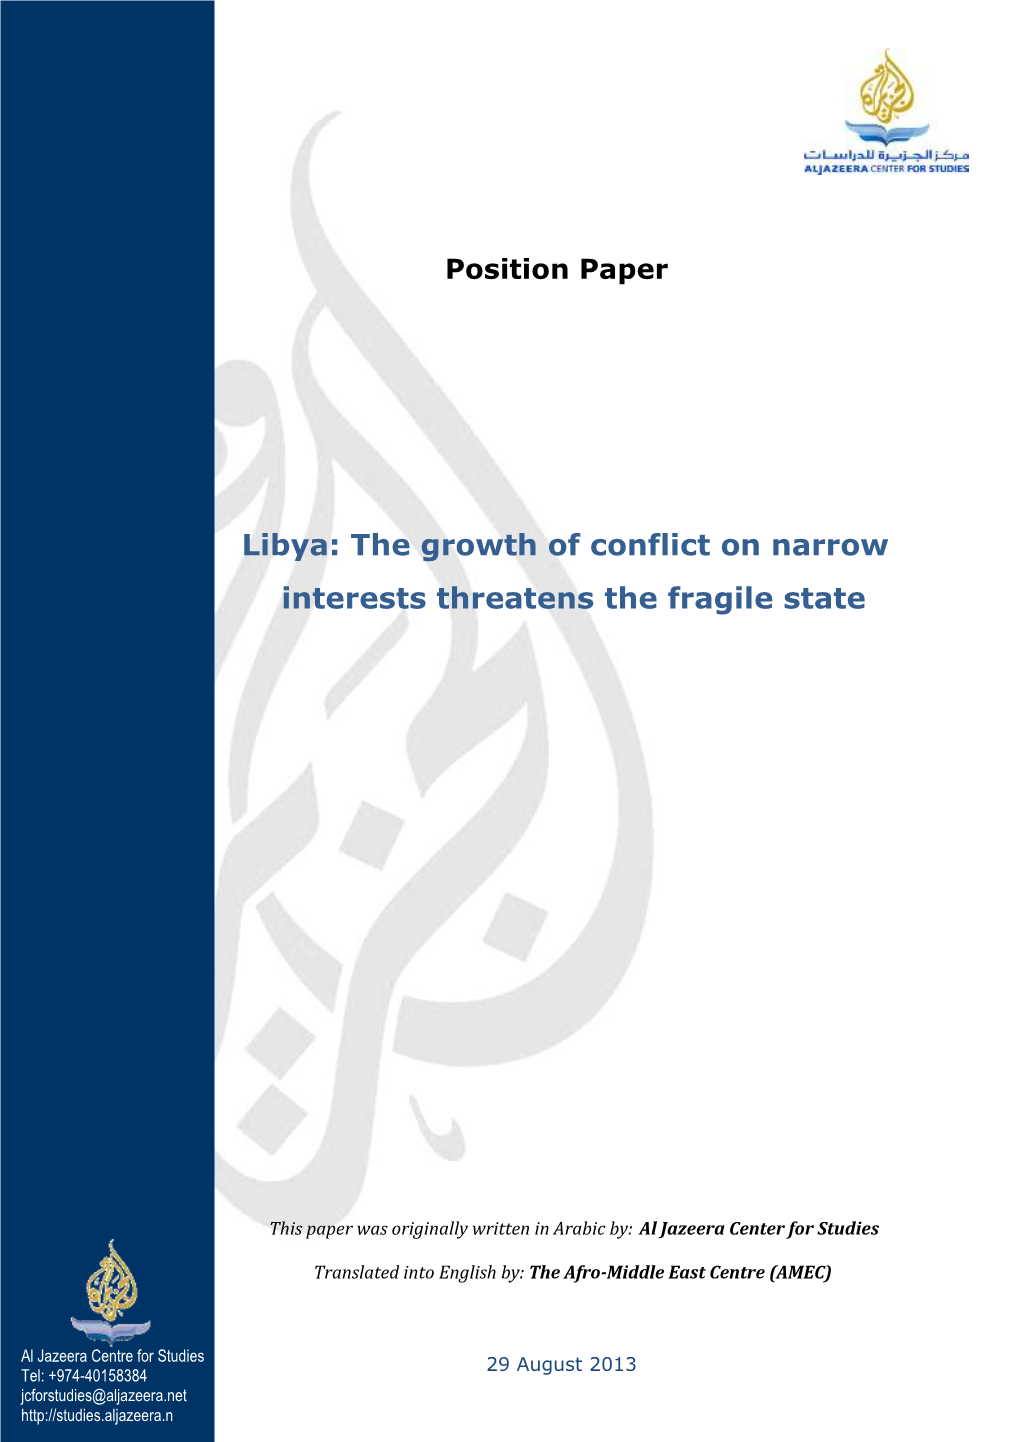 Libya: the Growth of Conflict on Narrow Interests Threatens the Fragile State